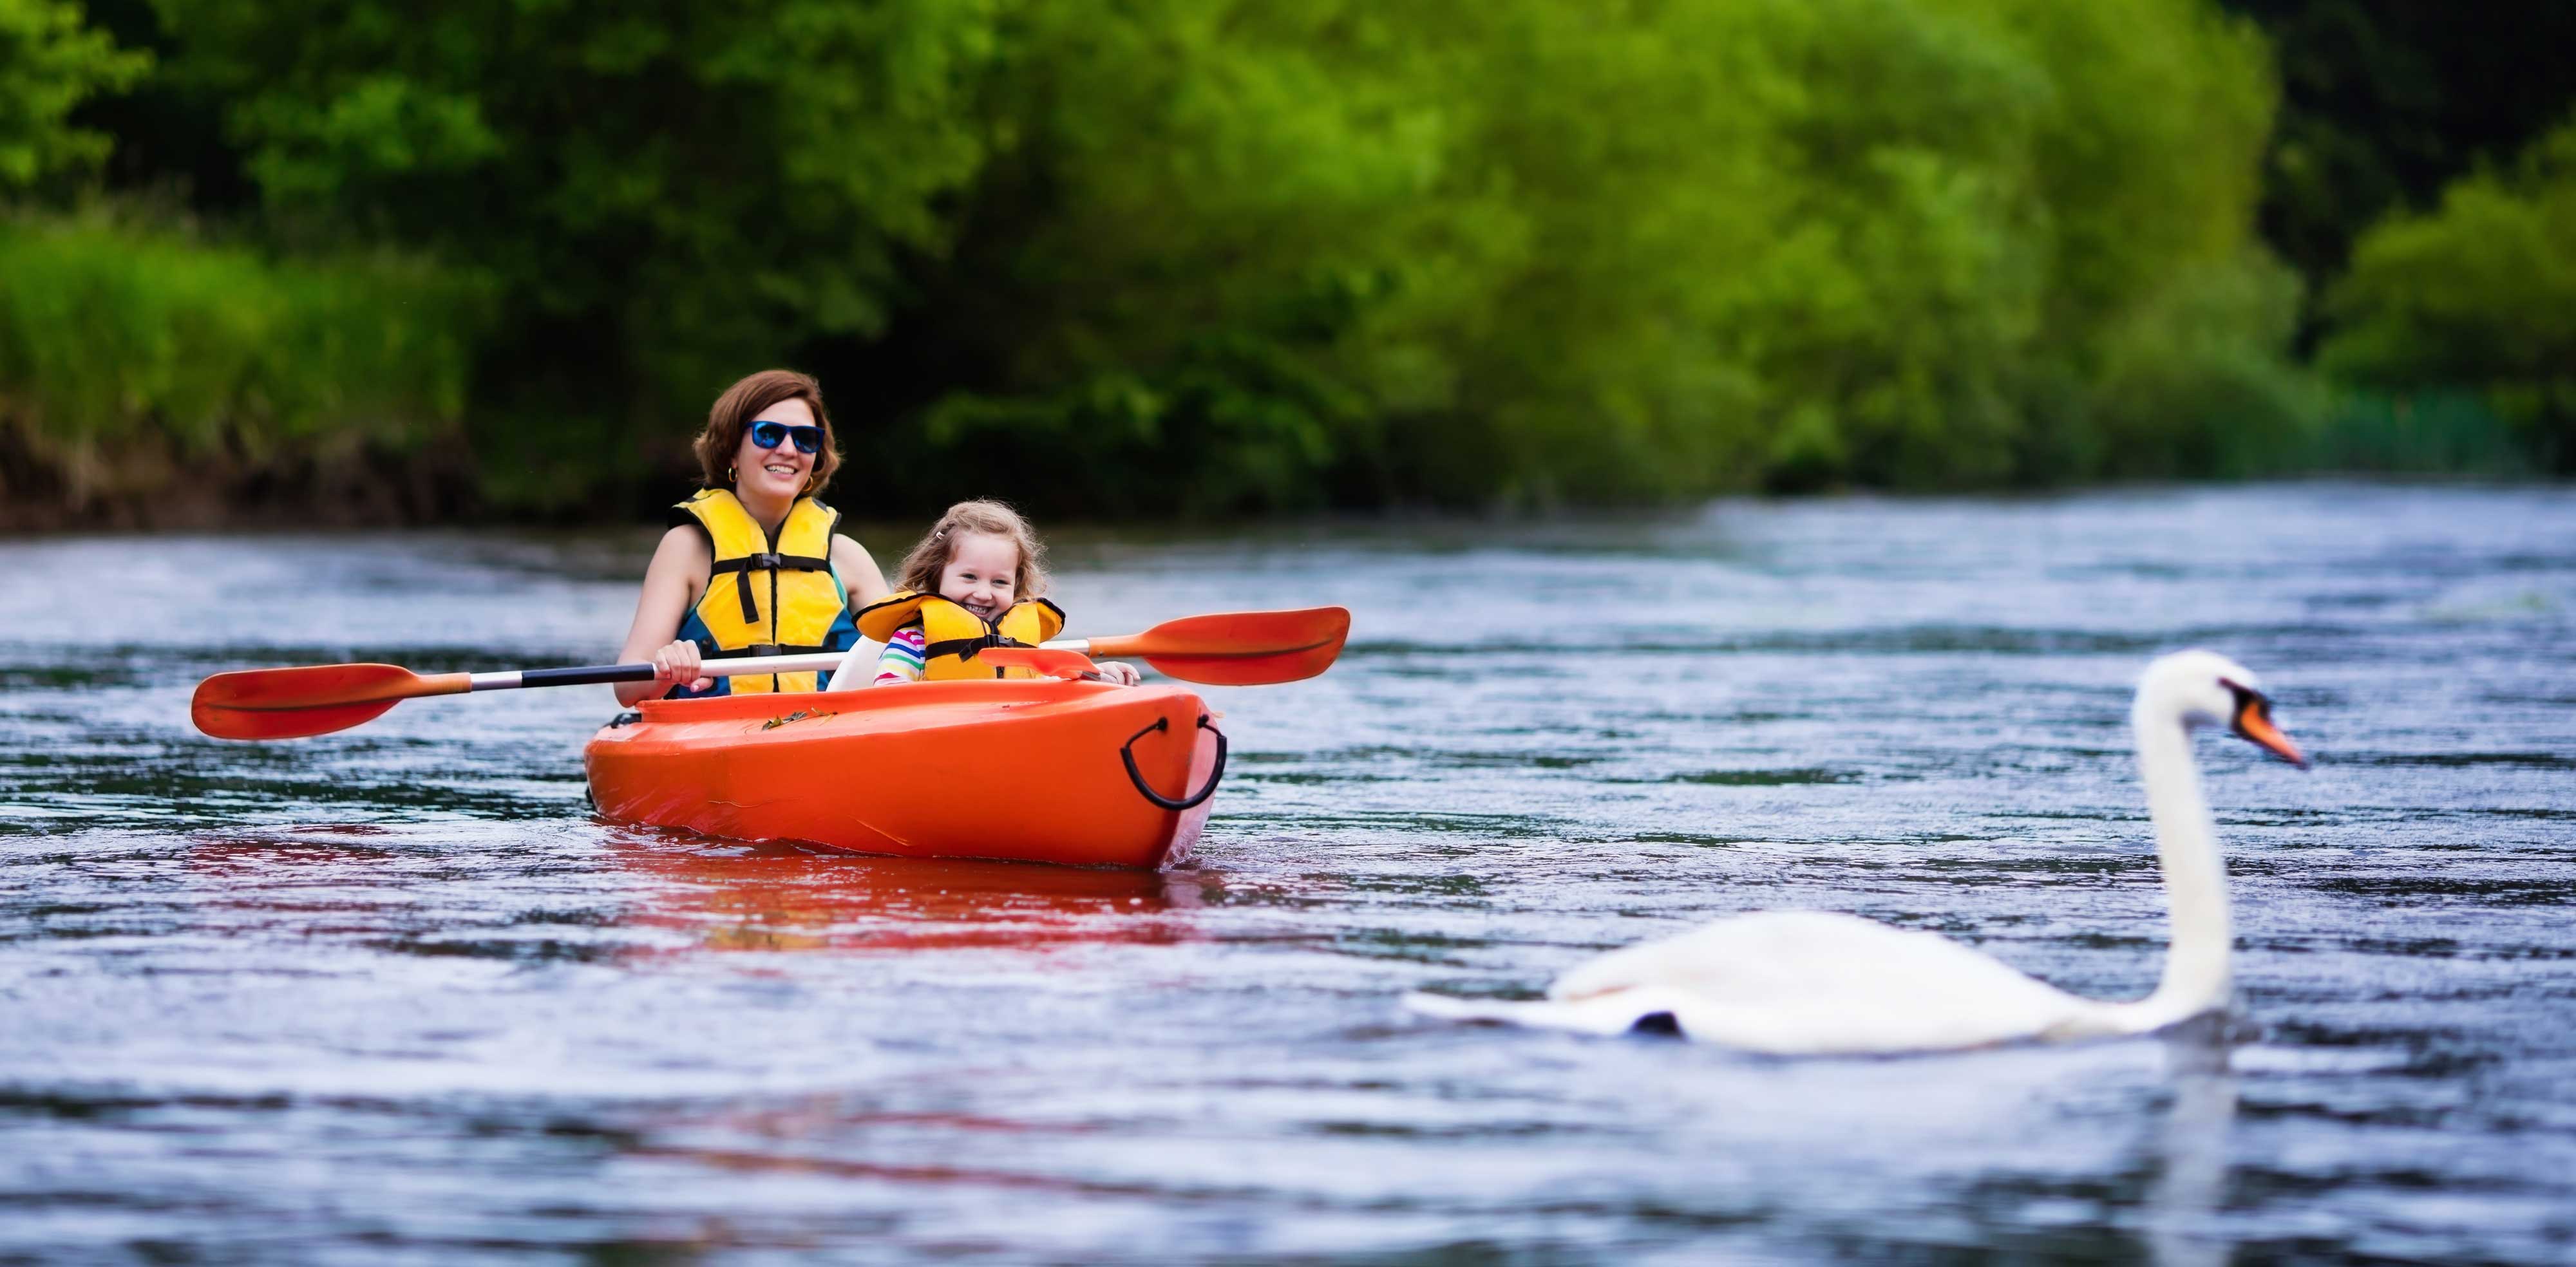 Two kayakers in a tandem kayak looking at a swan.